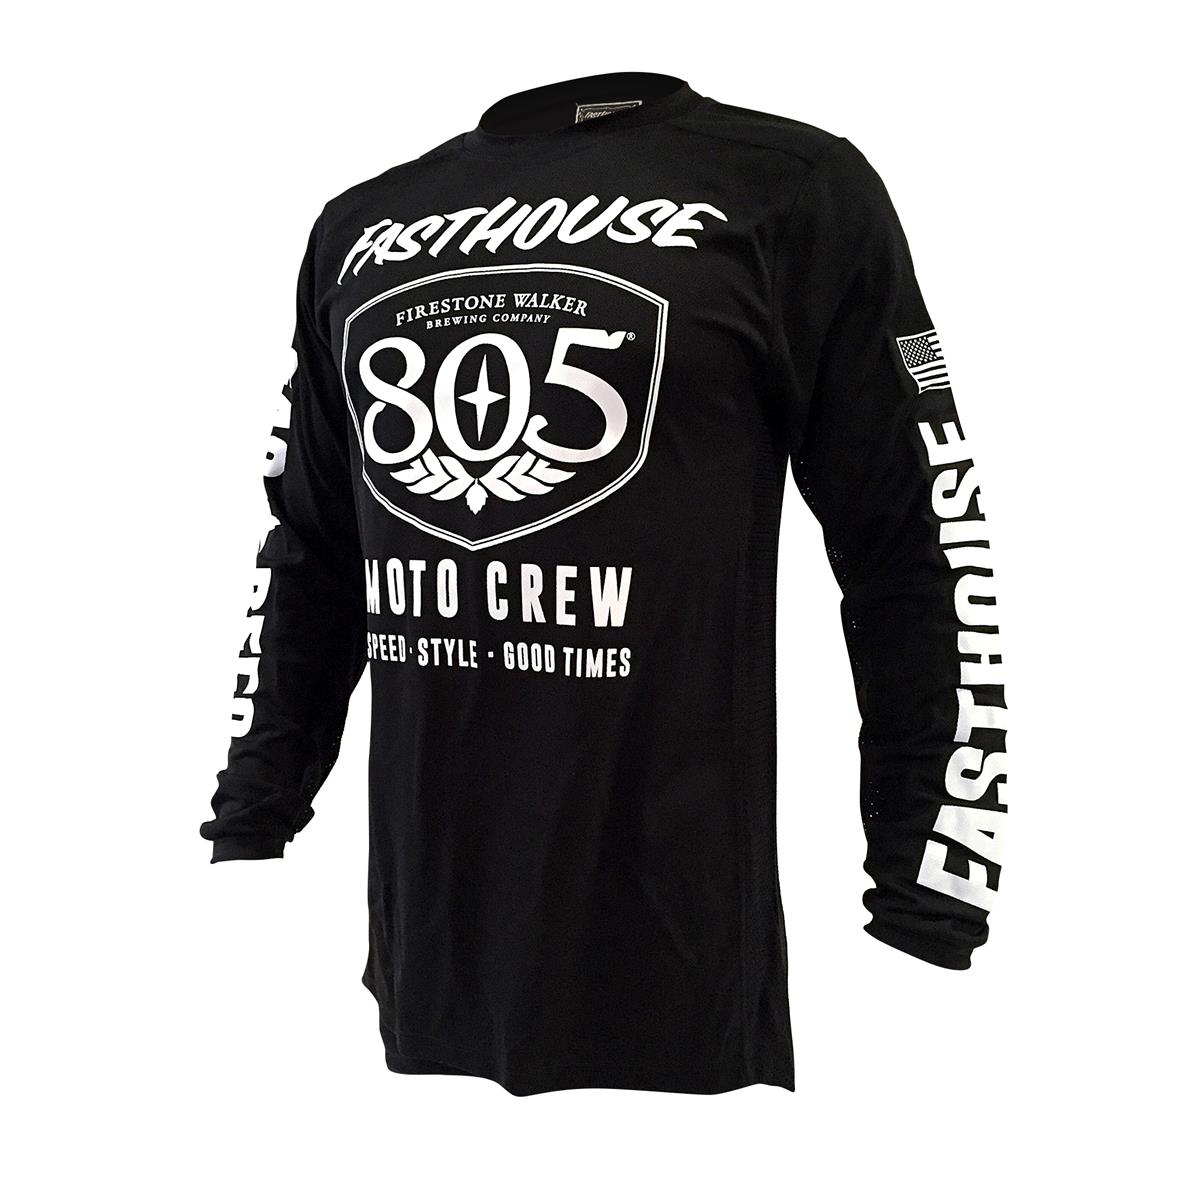 Fasthouse Jersey 805 Black